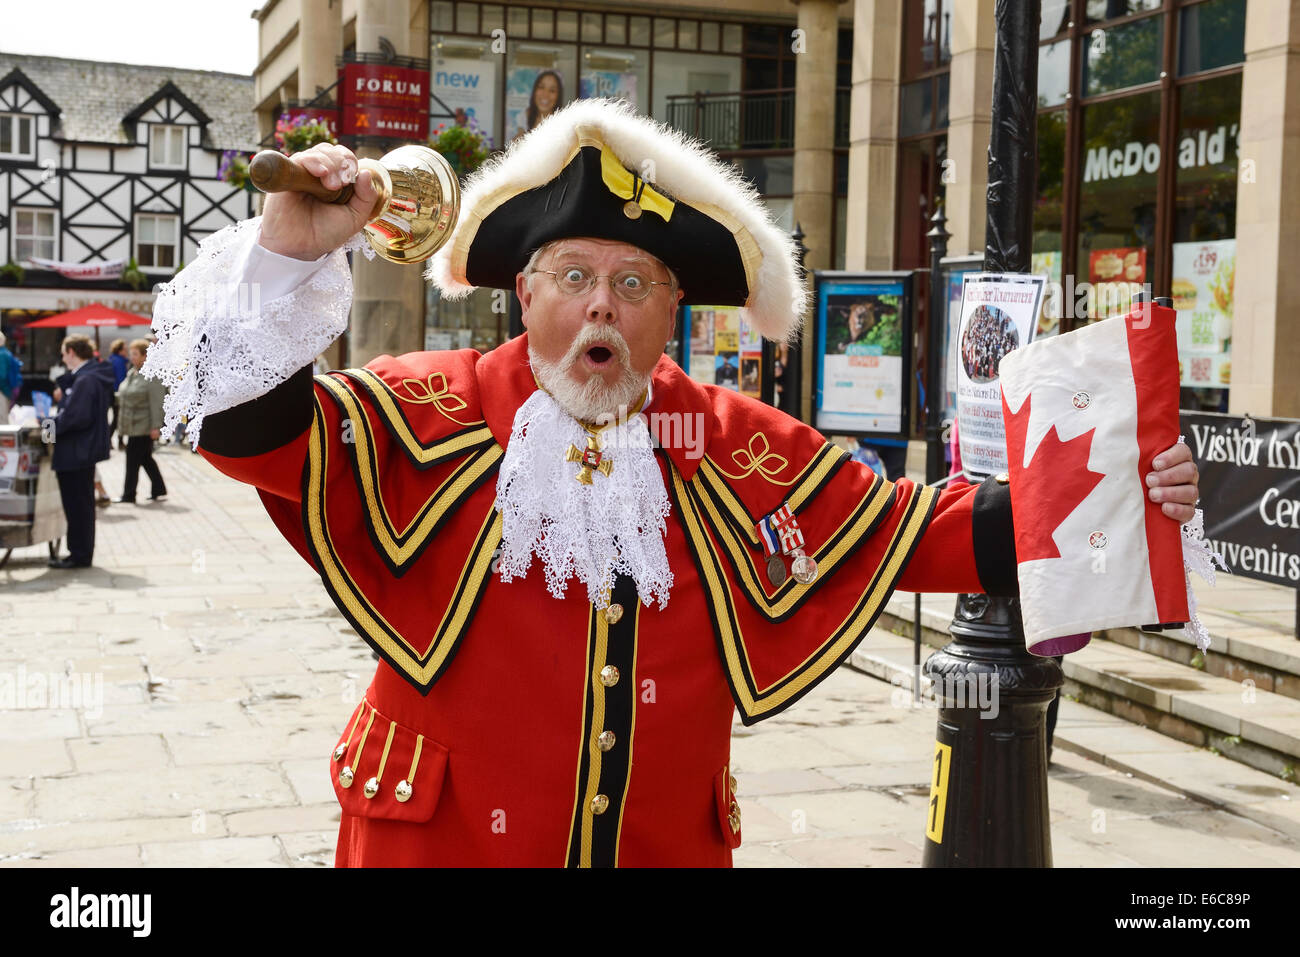 Chester, UK. 20th August, 2014. Chris Whyman Town Crier for the City of Kingston Ontario Canada at The World Town Crier Tournament being held outside the Town Hall in Chester City Centre UK Credit:  Andrew Paterson/Alamy Live News Stock Photo